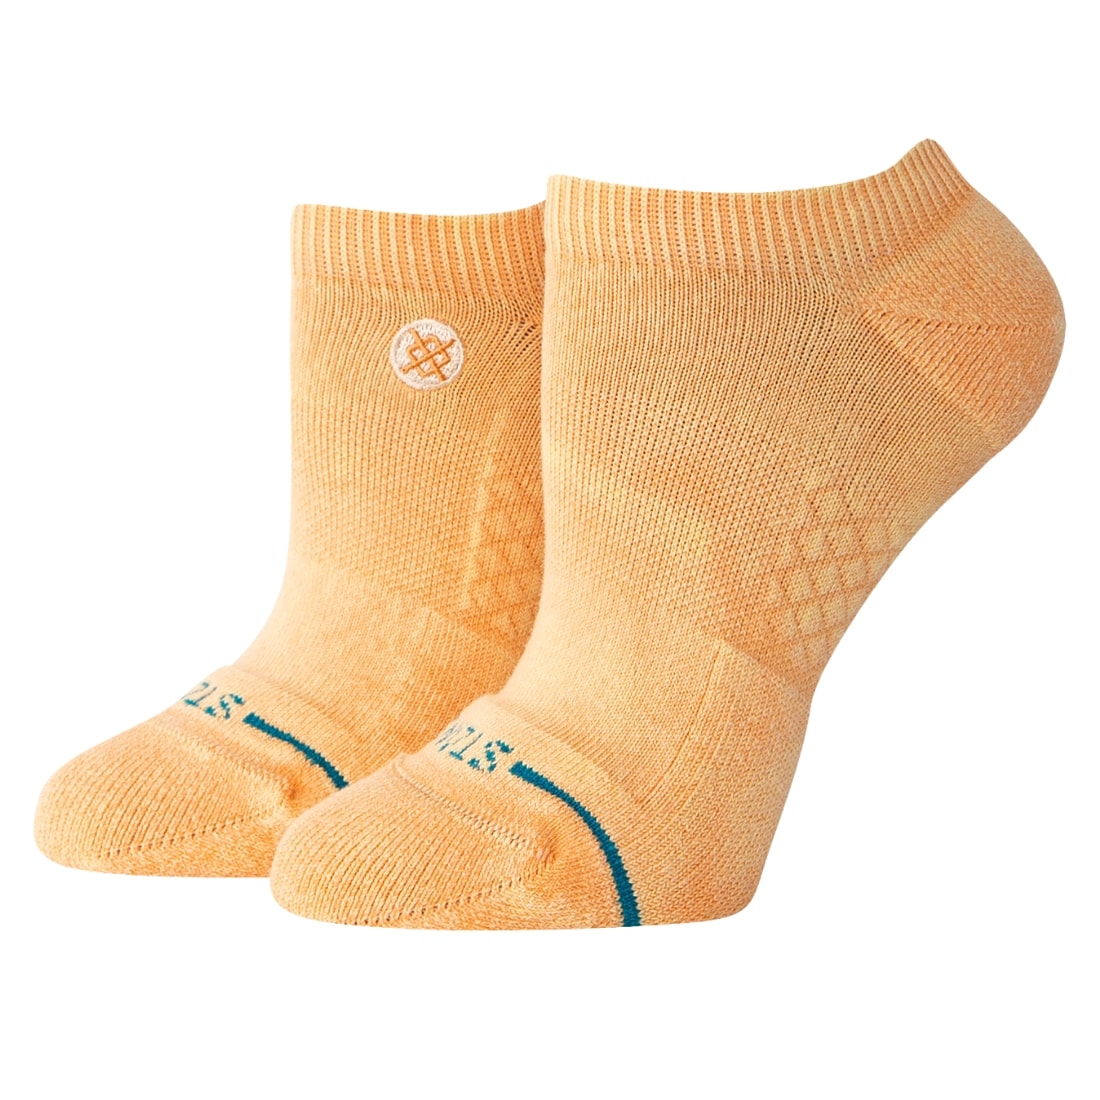 Stance Womens Peach Wash Socks - Peach - Womens Low Ankle Socks by Stance M (UK6-8.5)